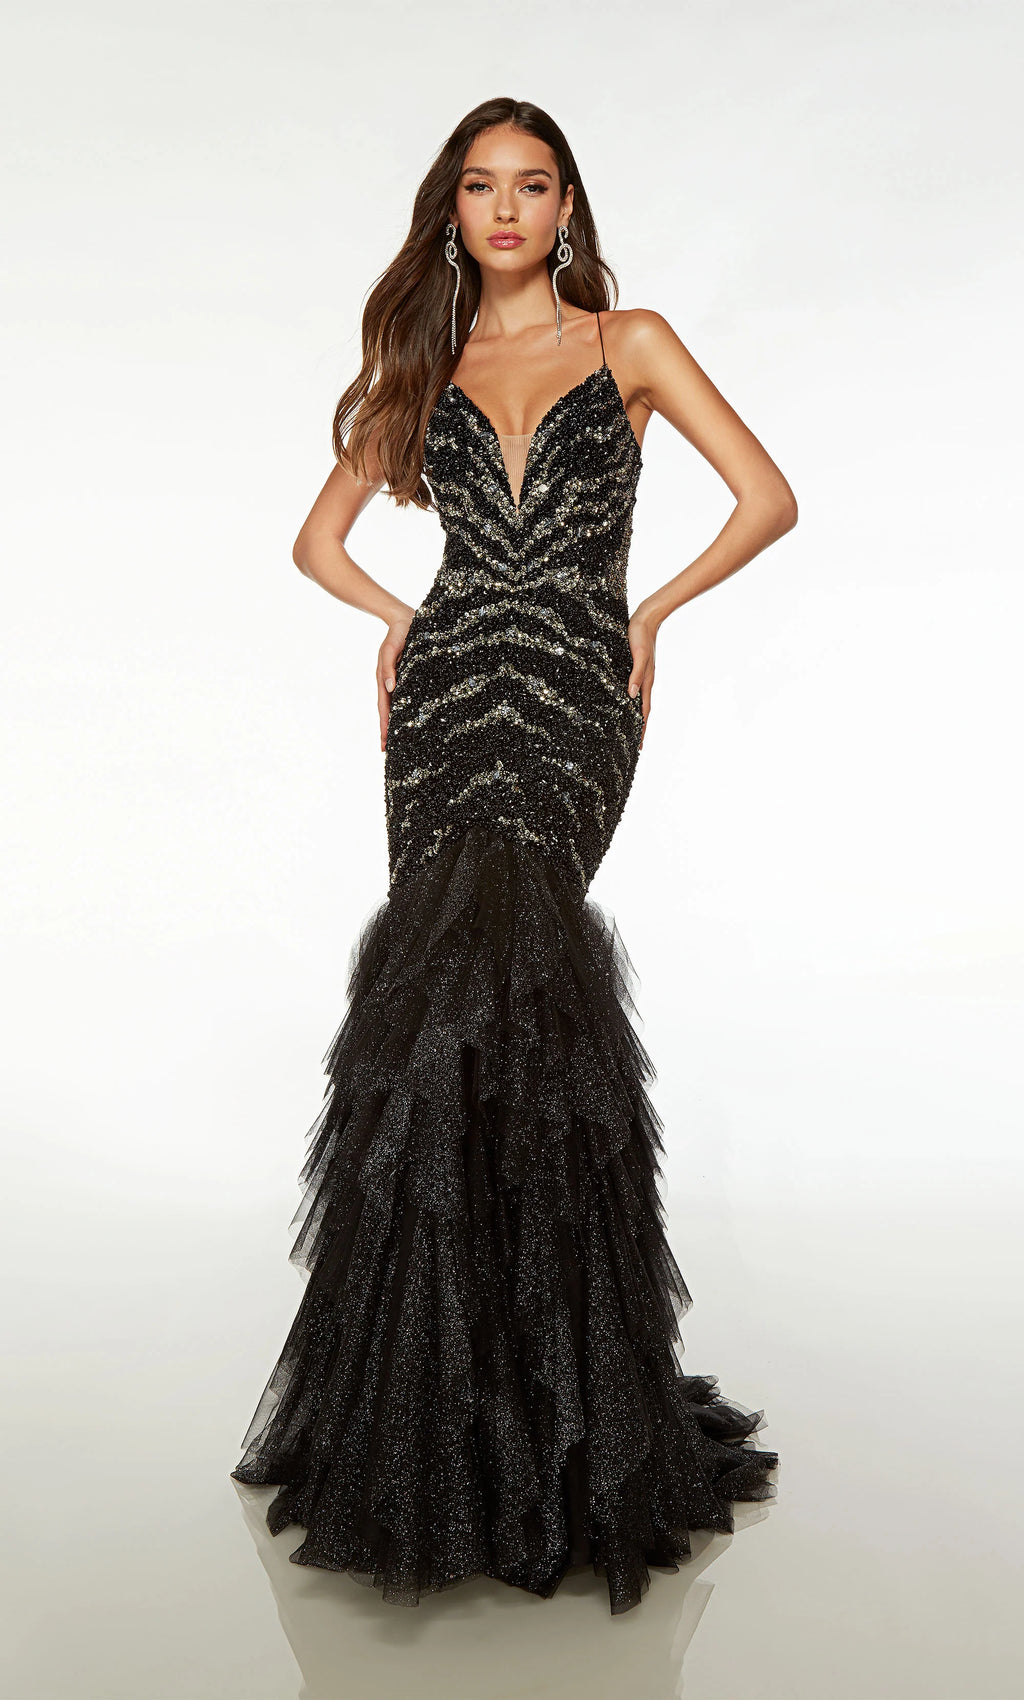 Be the most memorable in this unforgettable Alyce Paris black mermaid prom dress 61721. The fitted silhouette can be further cinched to your liking with the popular corset lace up featured on the back and shimmering combinations of black and silver beadwork adorn the bodice. Ruffled glitter tulle creates the mermaid sweep train.